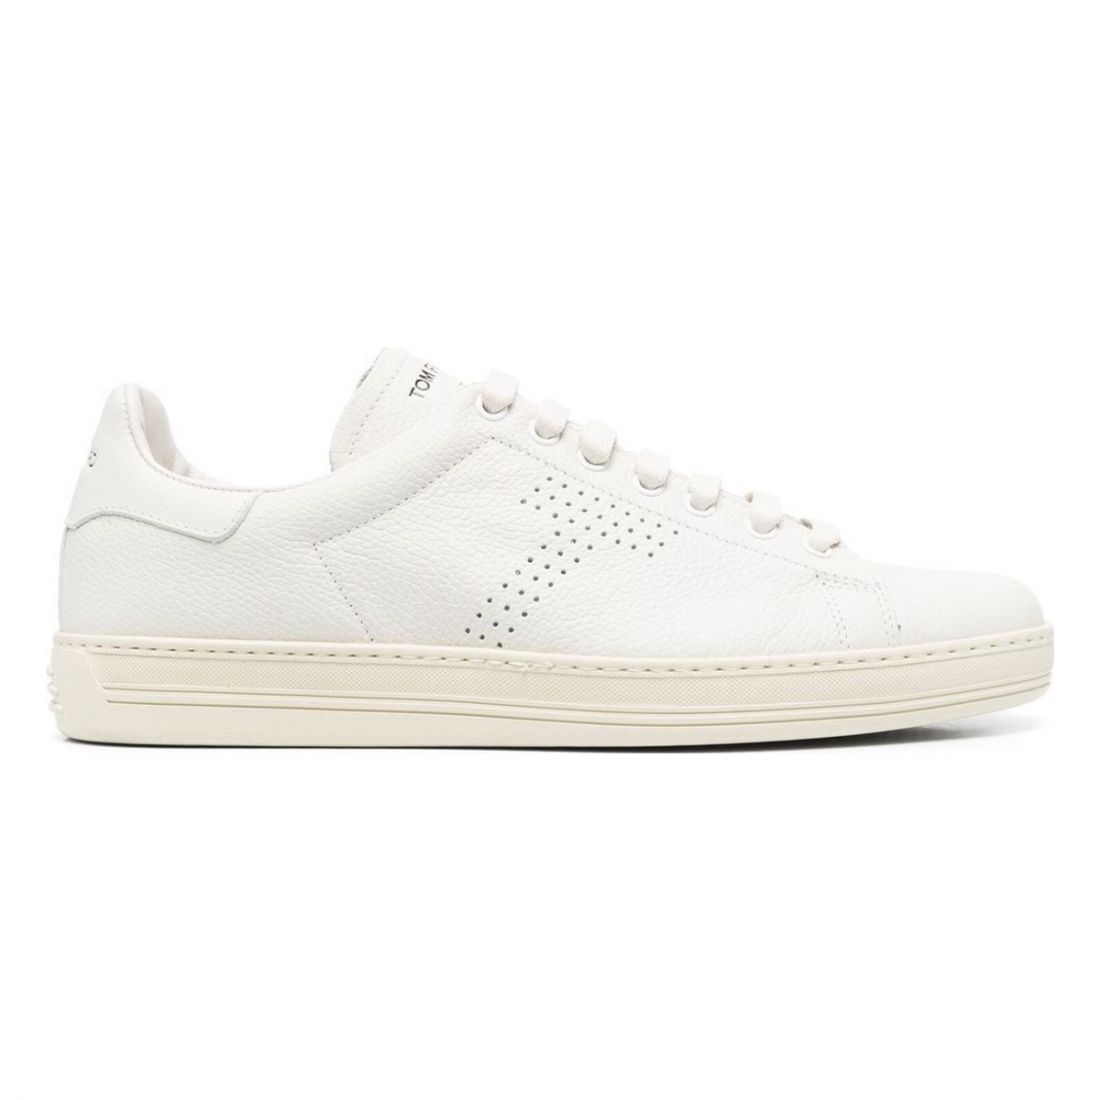 Tom Ford - Sneakers 'Warwick' pour Hommes